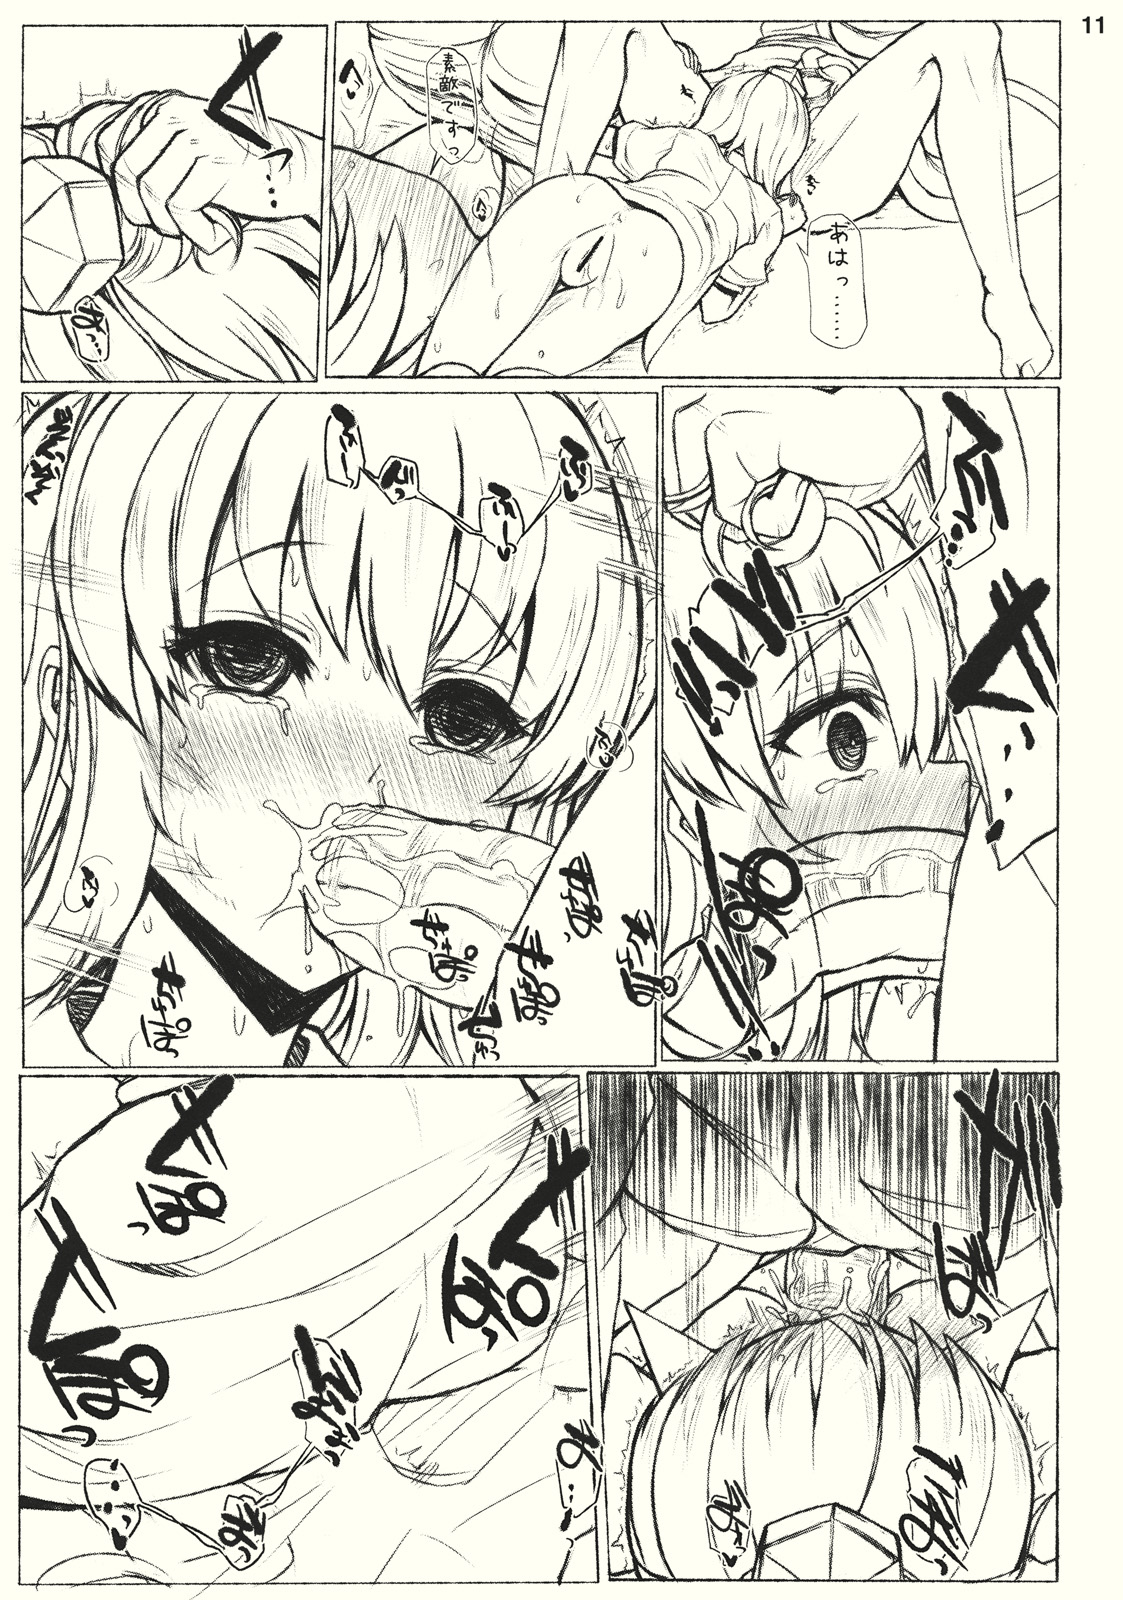 (SC50) [Inst] #01 (Touhou Project) (サンクリ50) (同人誌) [Inst] #01 (東方)